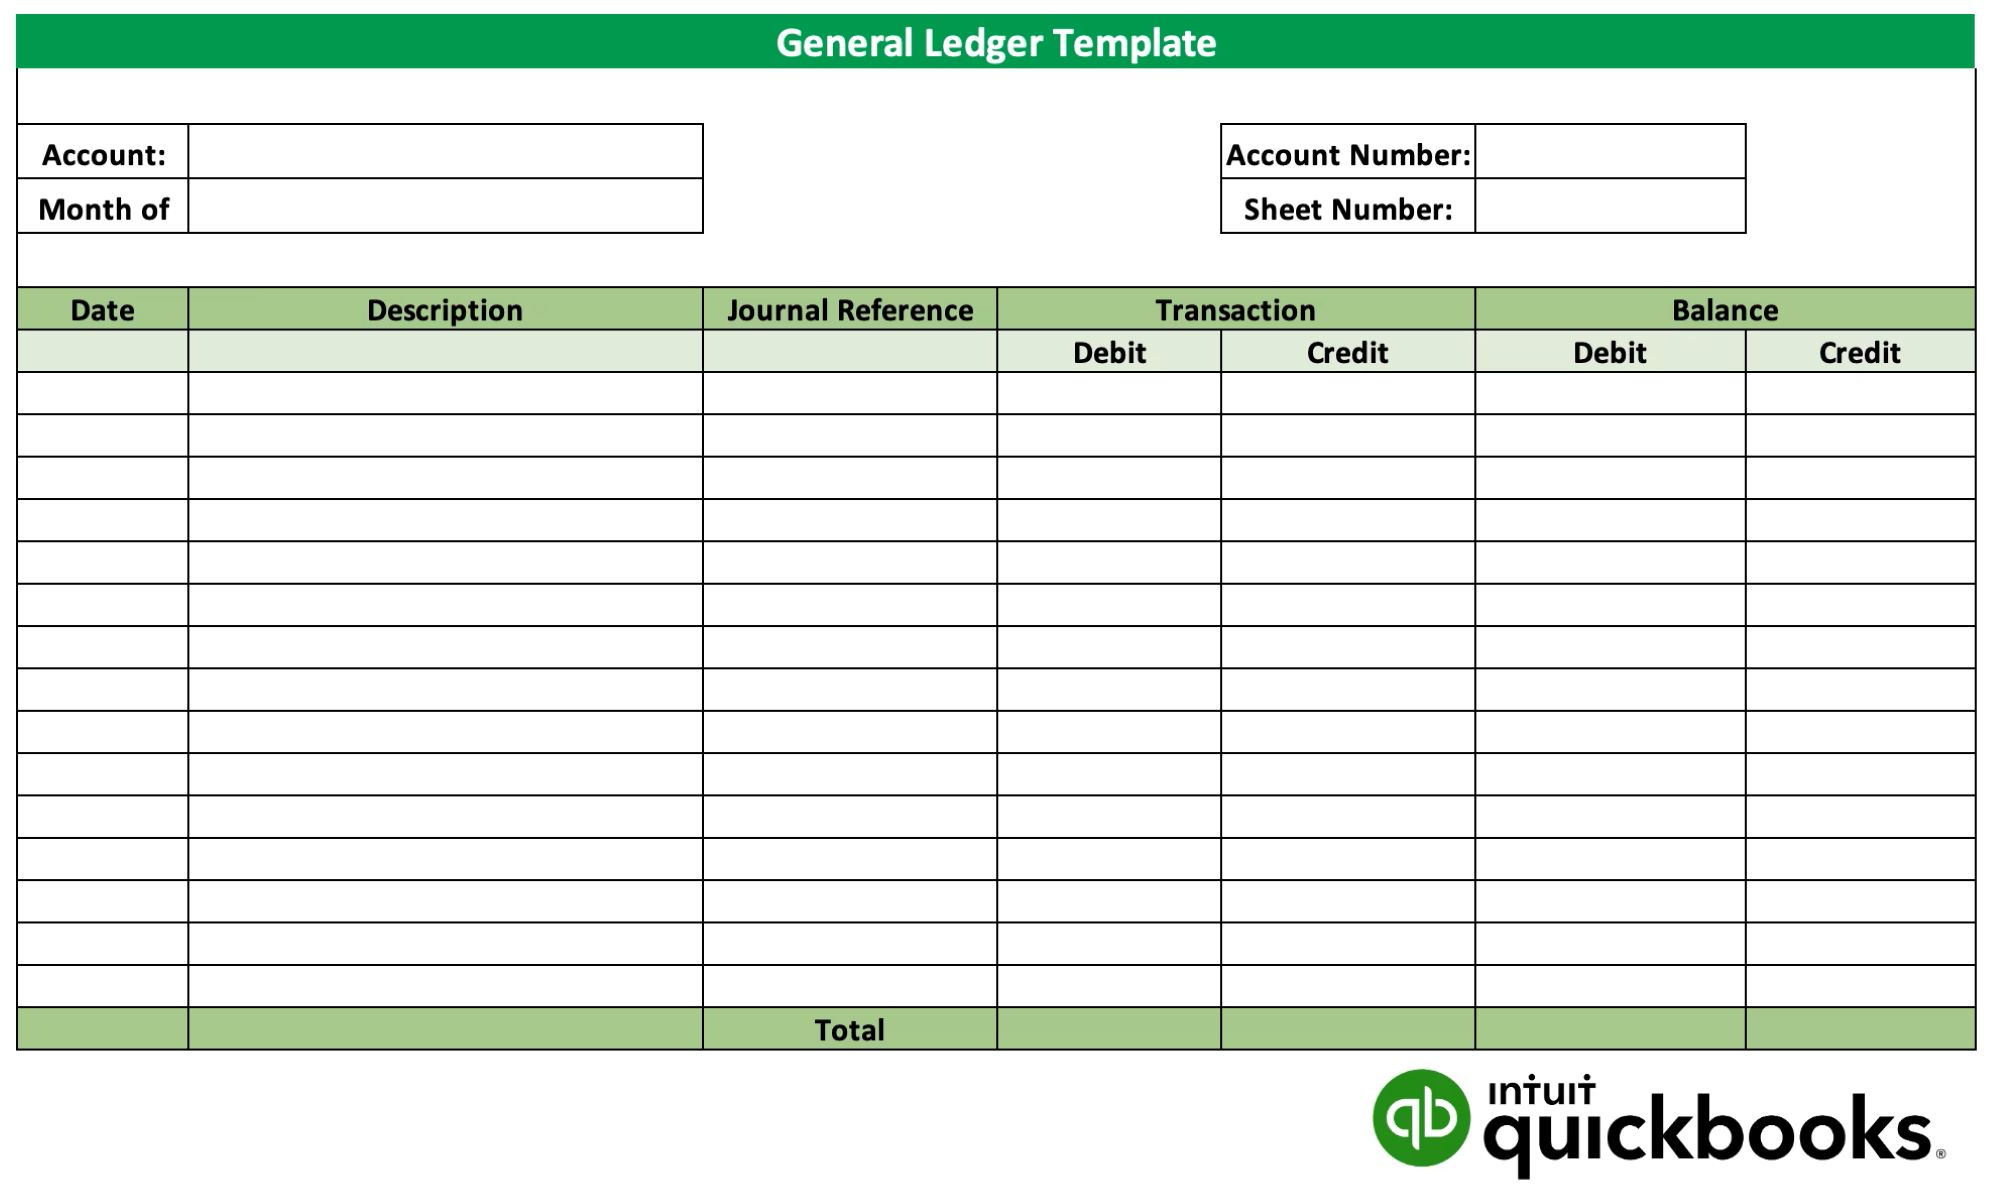 what-is-general-ledger-in-quickbooks